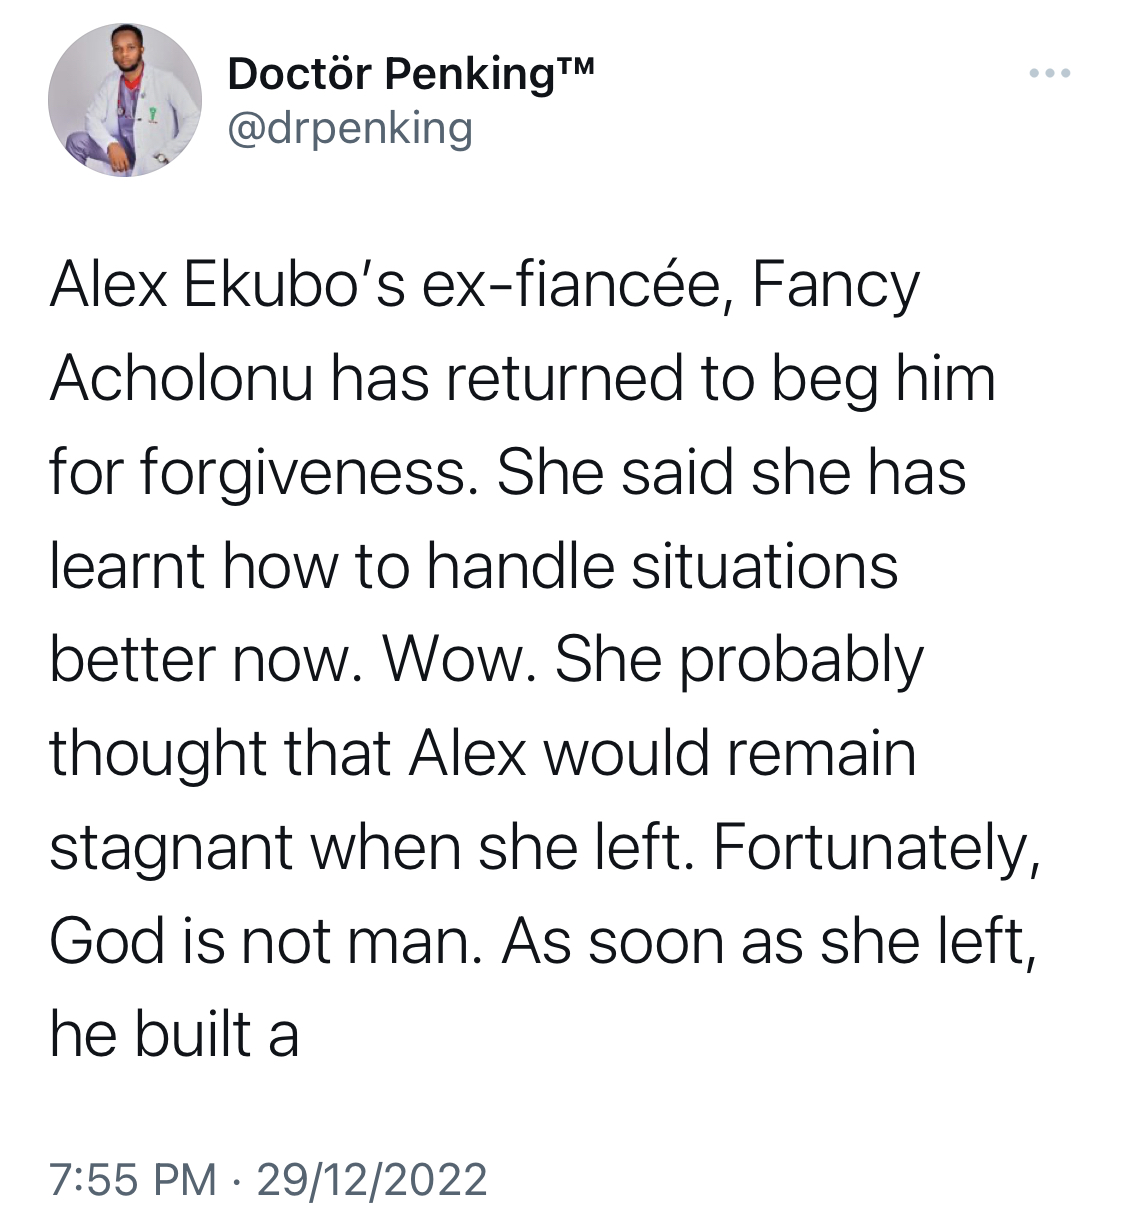 Maybe she was the witch stopping his progress - Influencer Dr Penking says about Alex Ekubo’s Ex-fiancée Fancy Acholonu